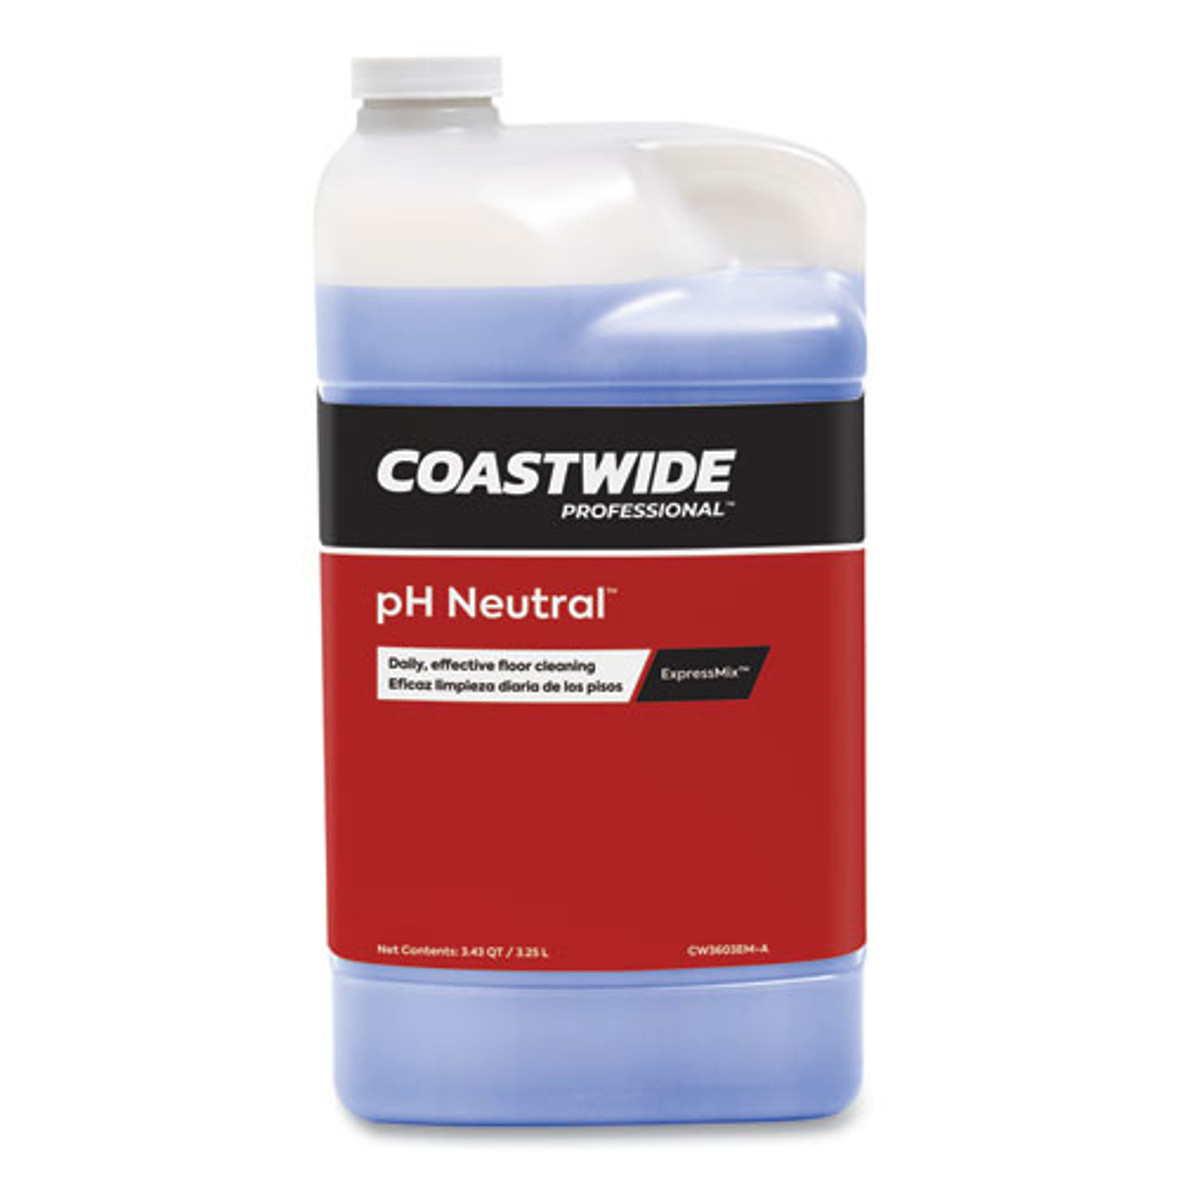 Coastwide Professional pH Neutral Daily Floor Cleaner Concentrate for ExpressMix Systems, Strawberry Scent